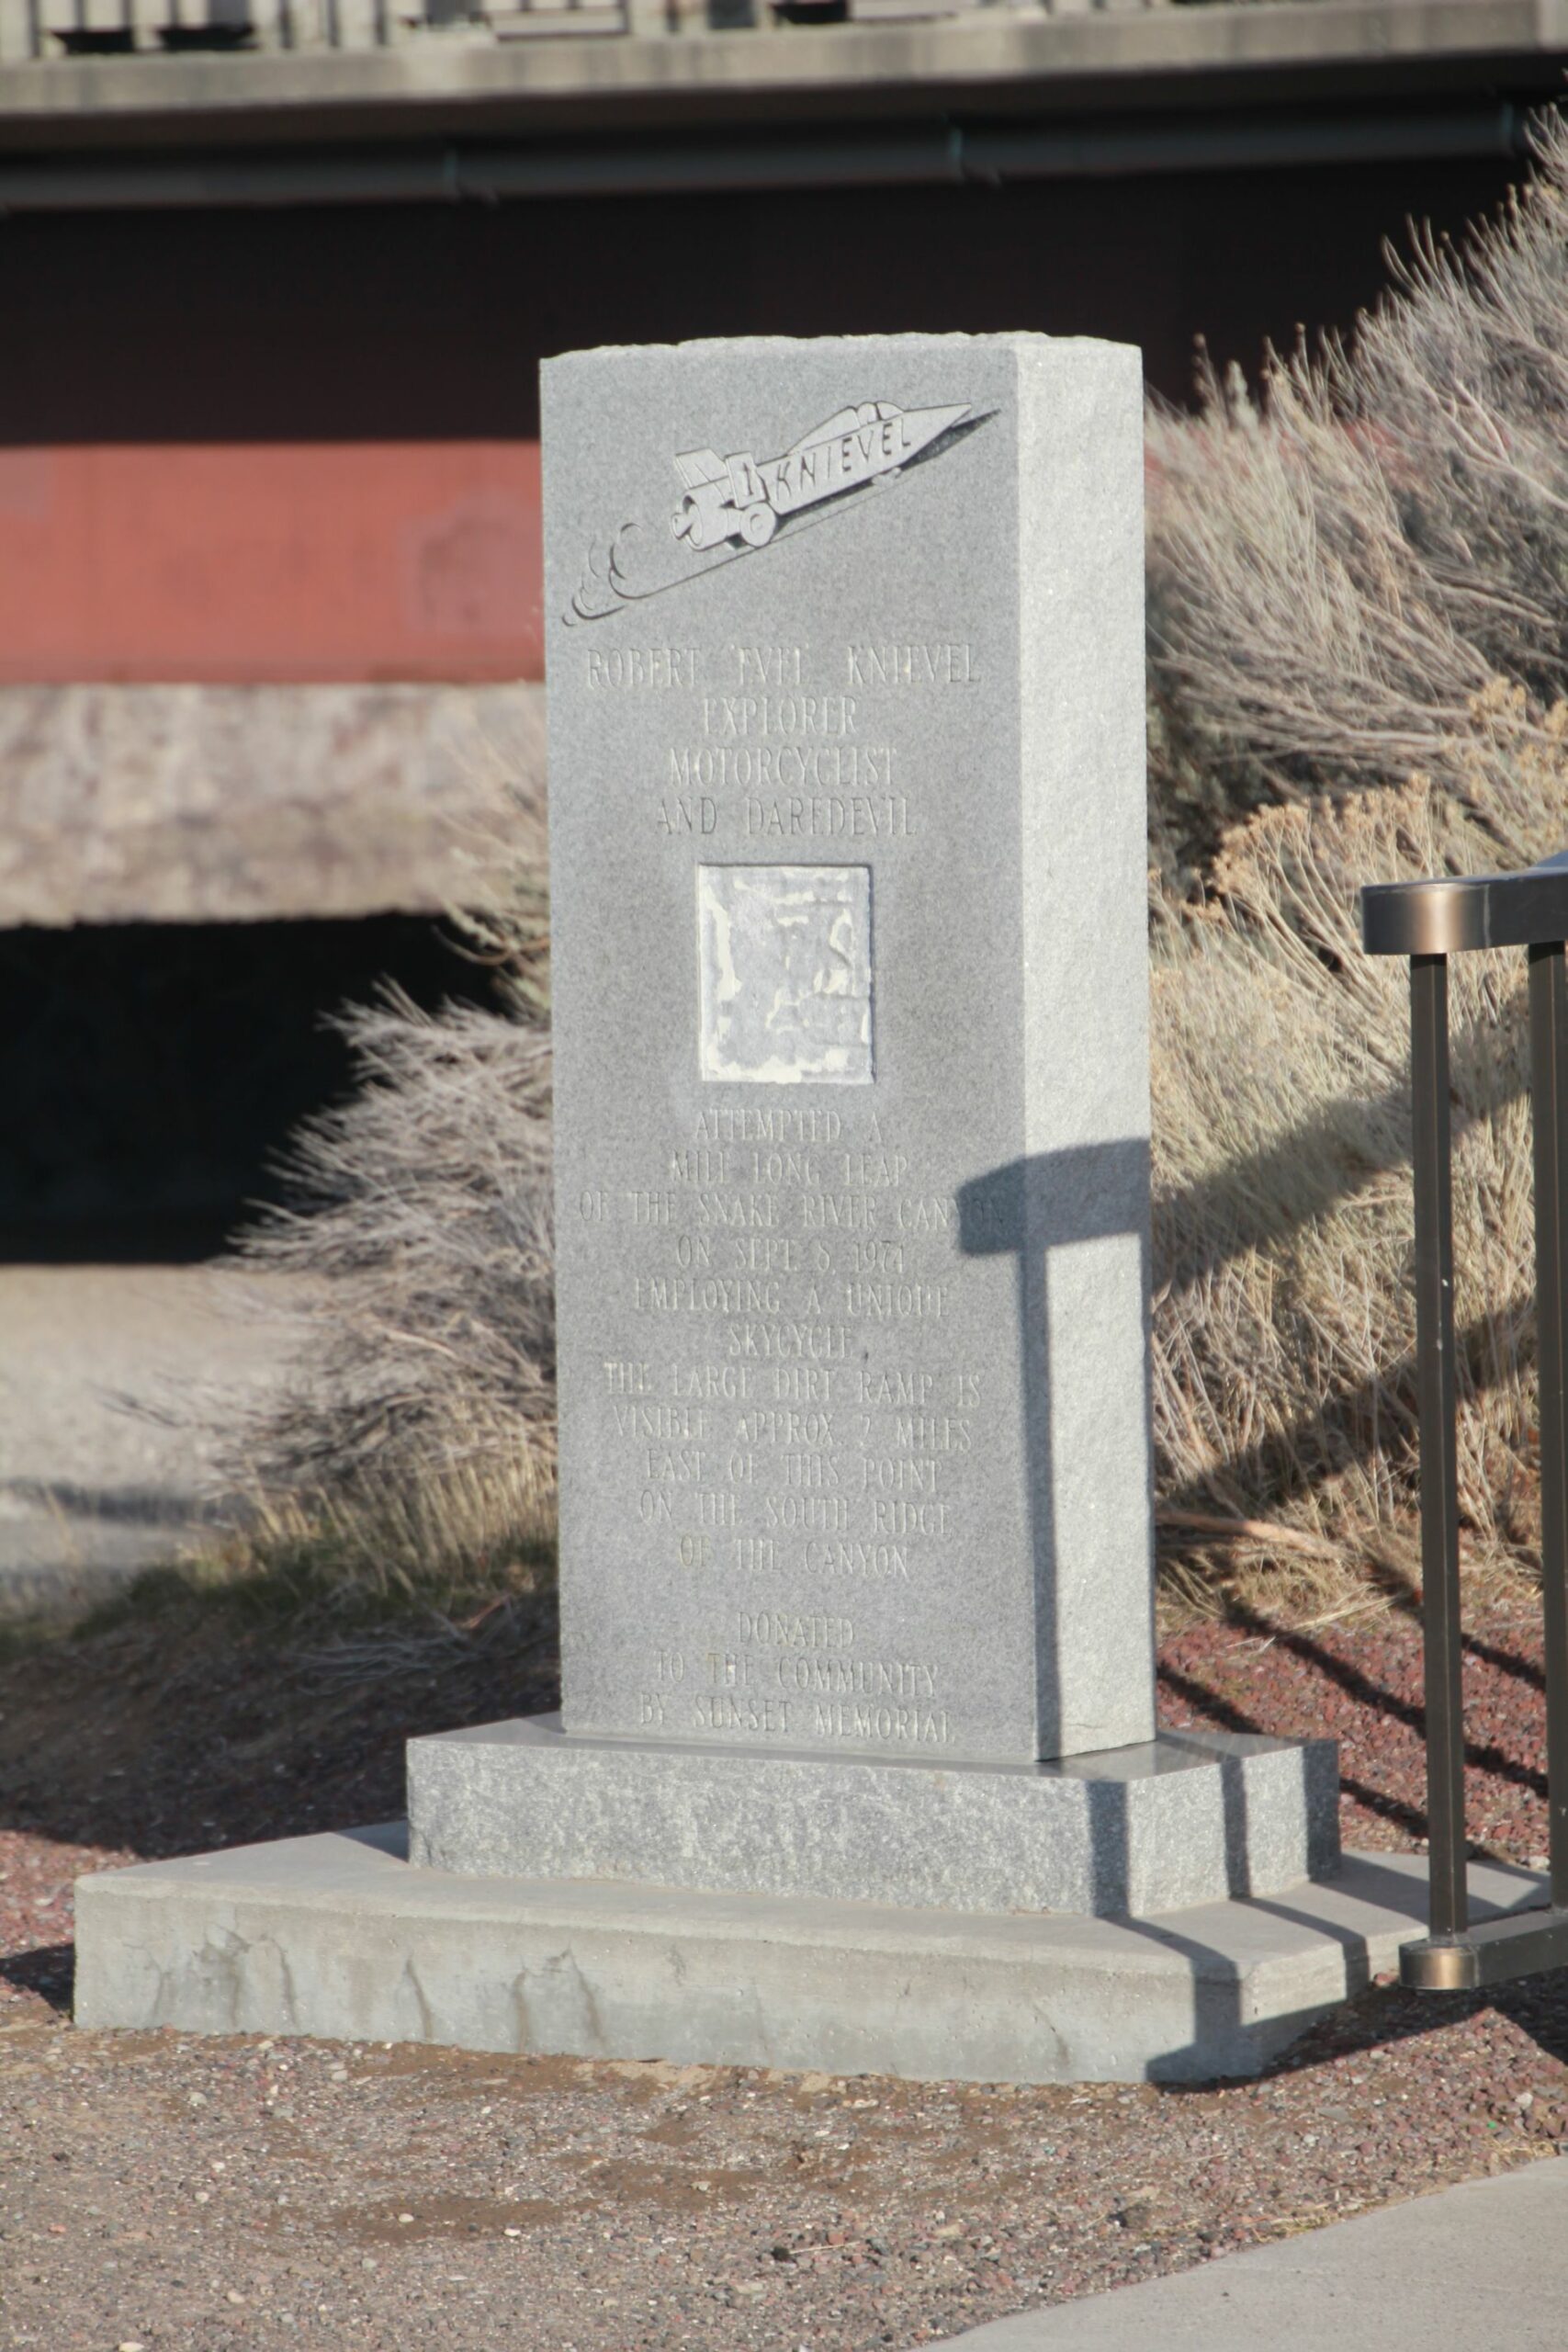 Snake River Canyon Evel Knievel jump point monument in Twin Falls, Idaho